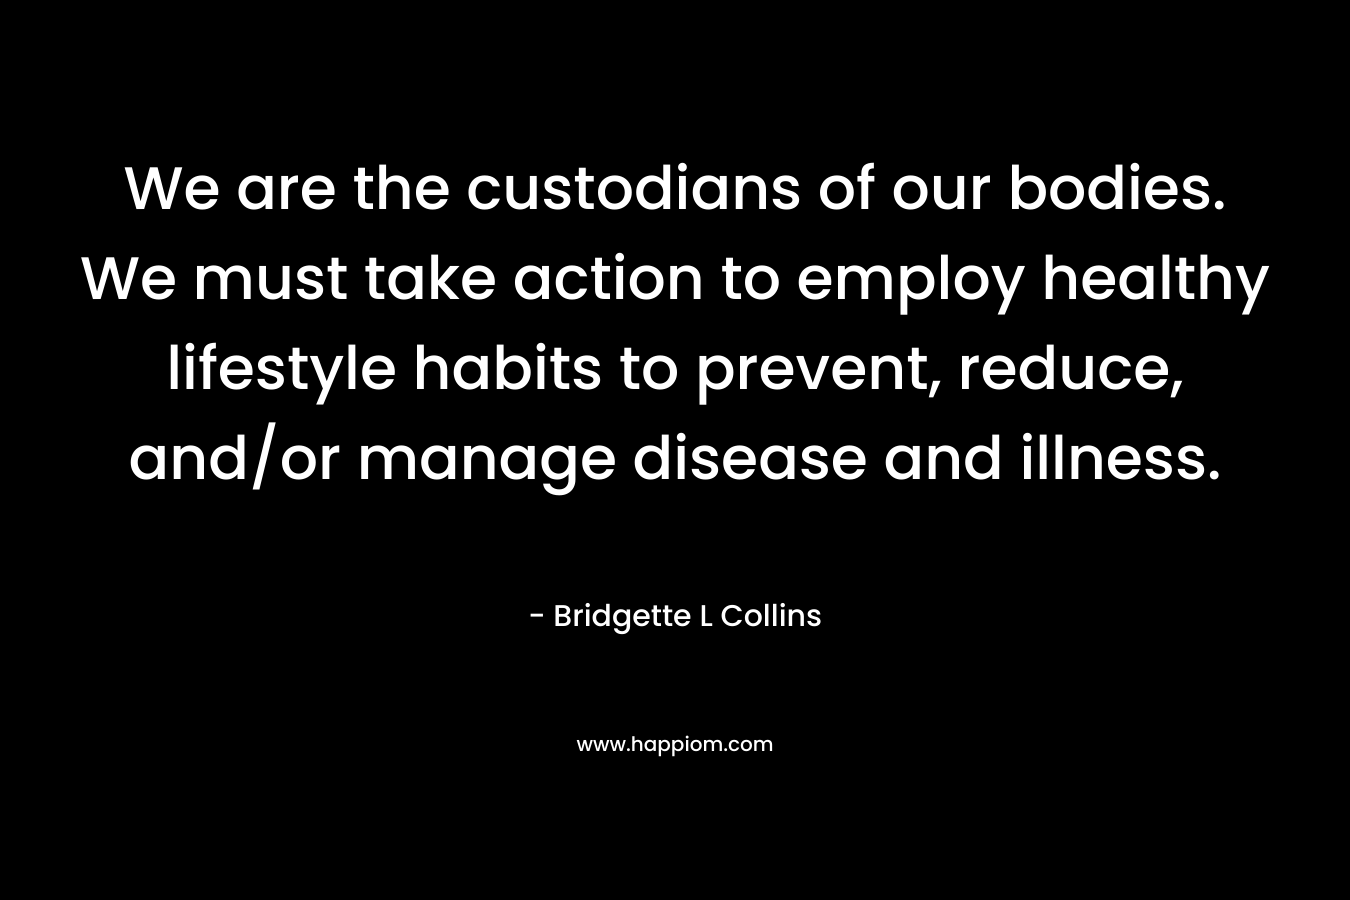 We are the custodians of our bodies. We must take action to employ healthy lifestyle habits to prevent, reduce, and/or manage disease and illness. – Bridgette L Collins